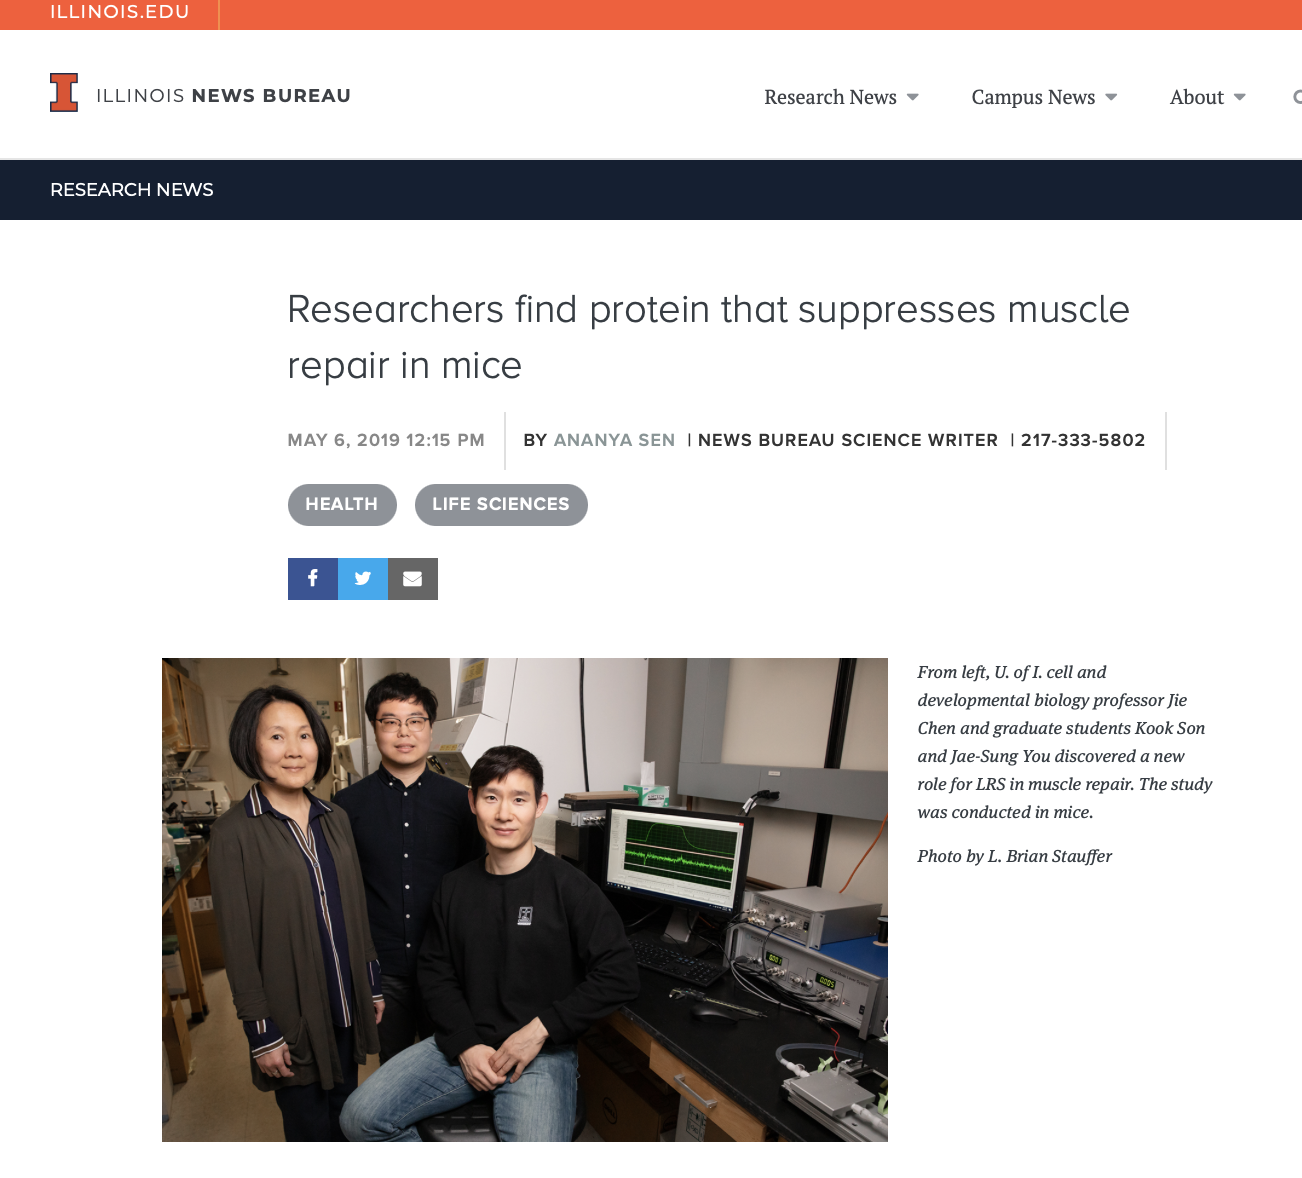 Researchers find protein that suppresses muscle repair in mice